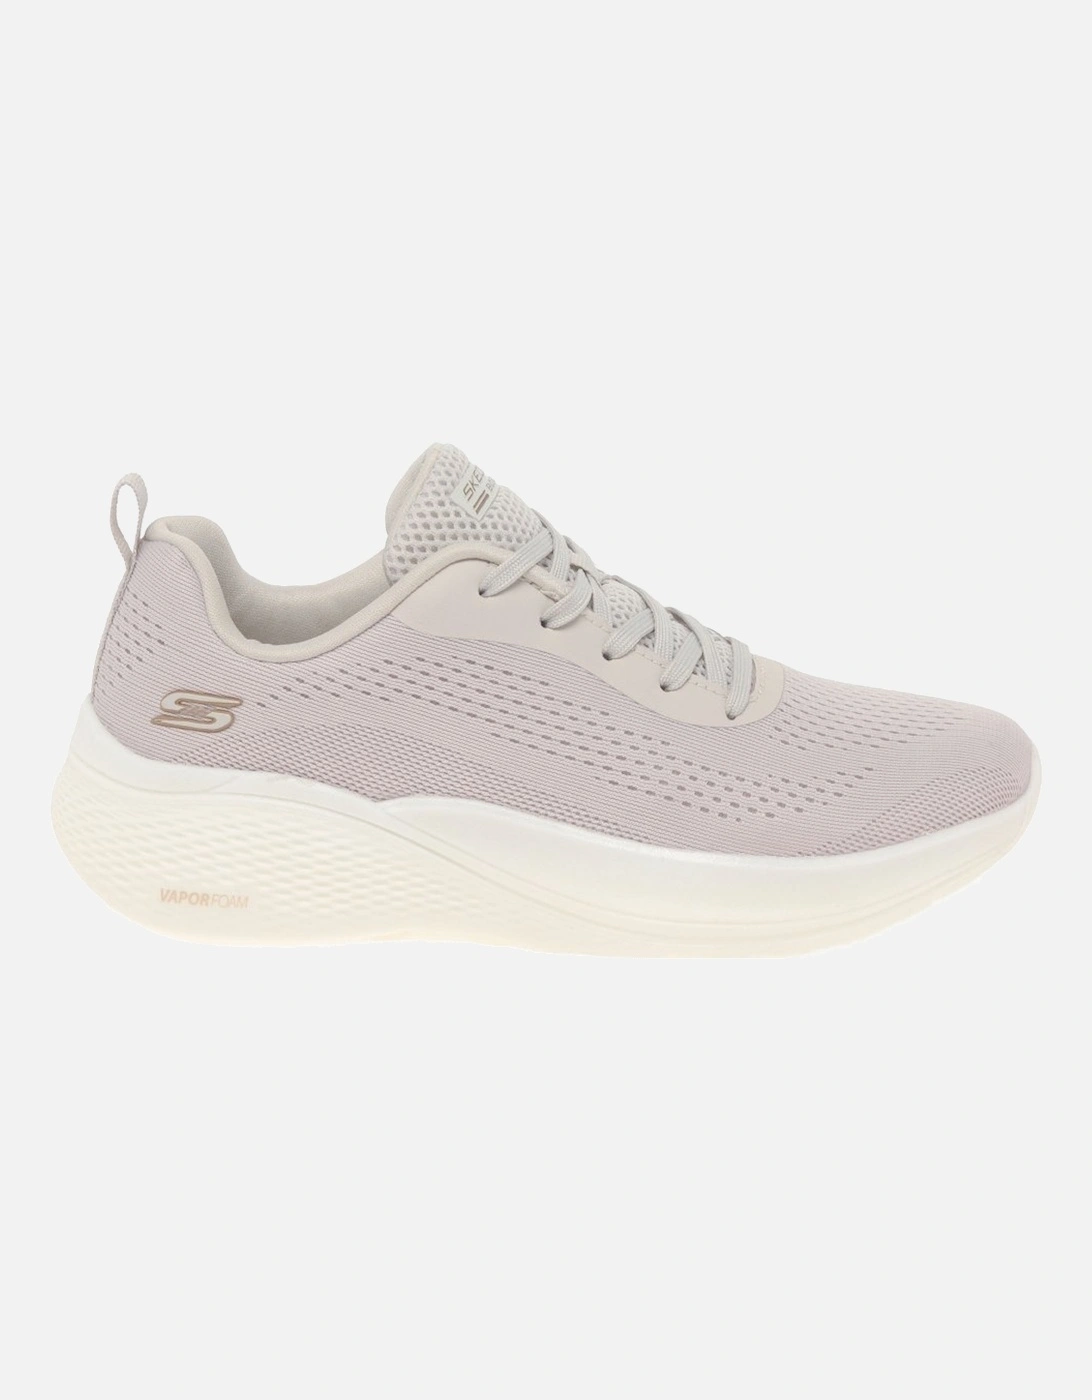 Bobs Infinity Womens Trainers